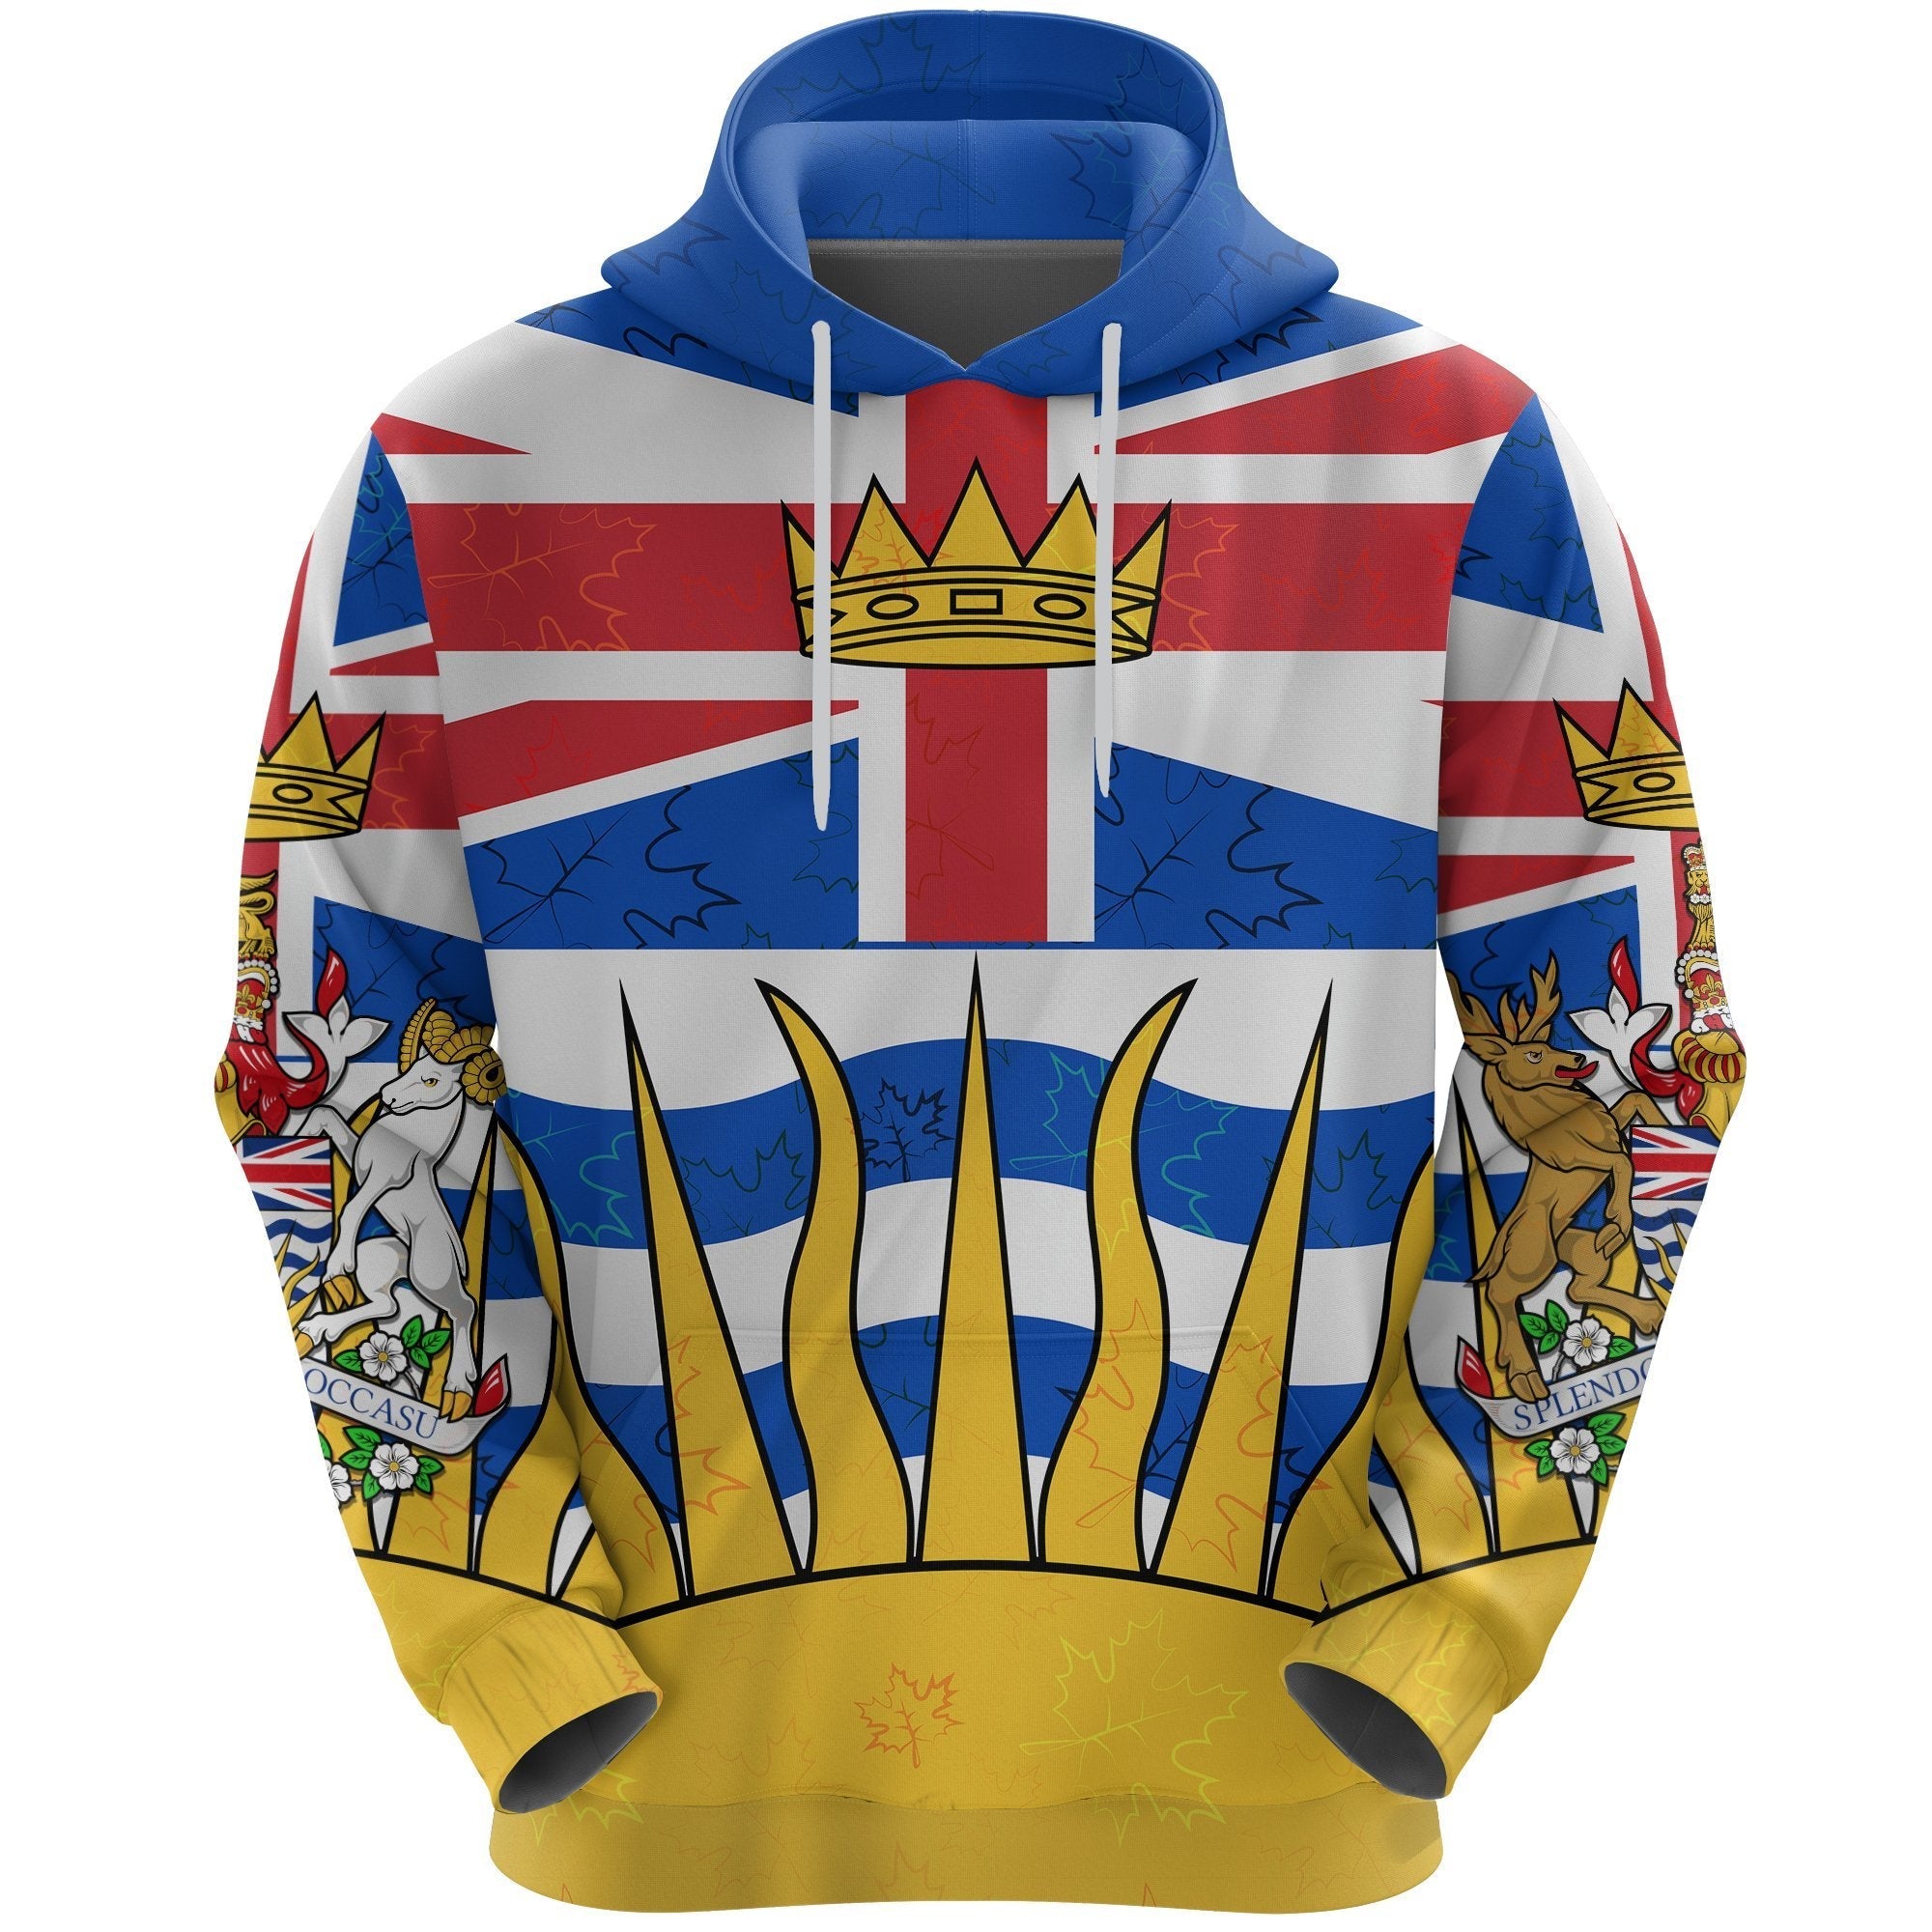 canada-coat-of-arms-hoodie-my-style